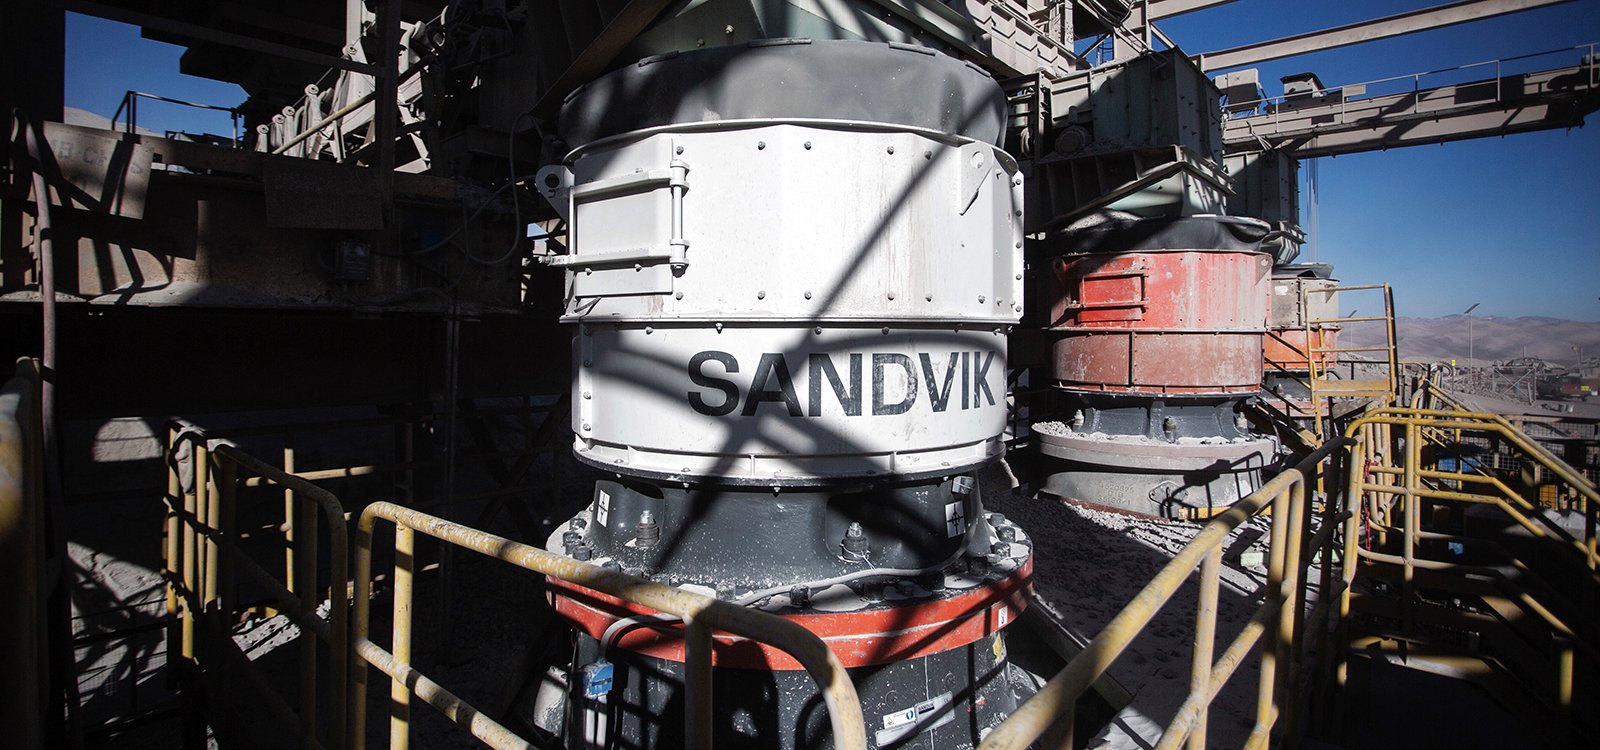 <p>The first of its kind in Chile, a Sandvik CH870i crusher has helped Mantos Blancos’ copper mine modernize operations. </p>
